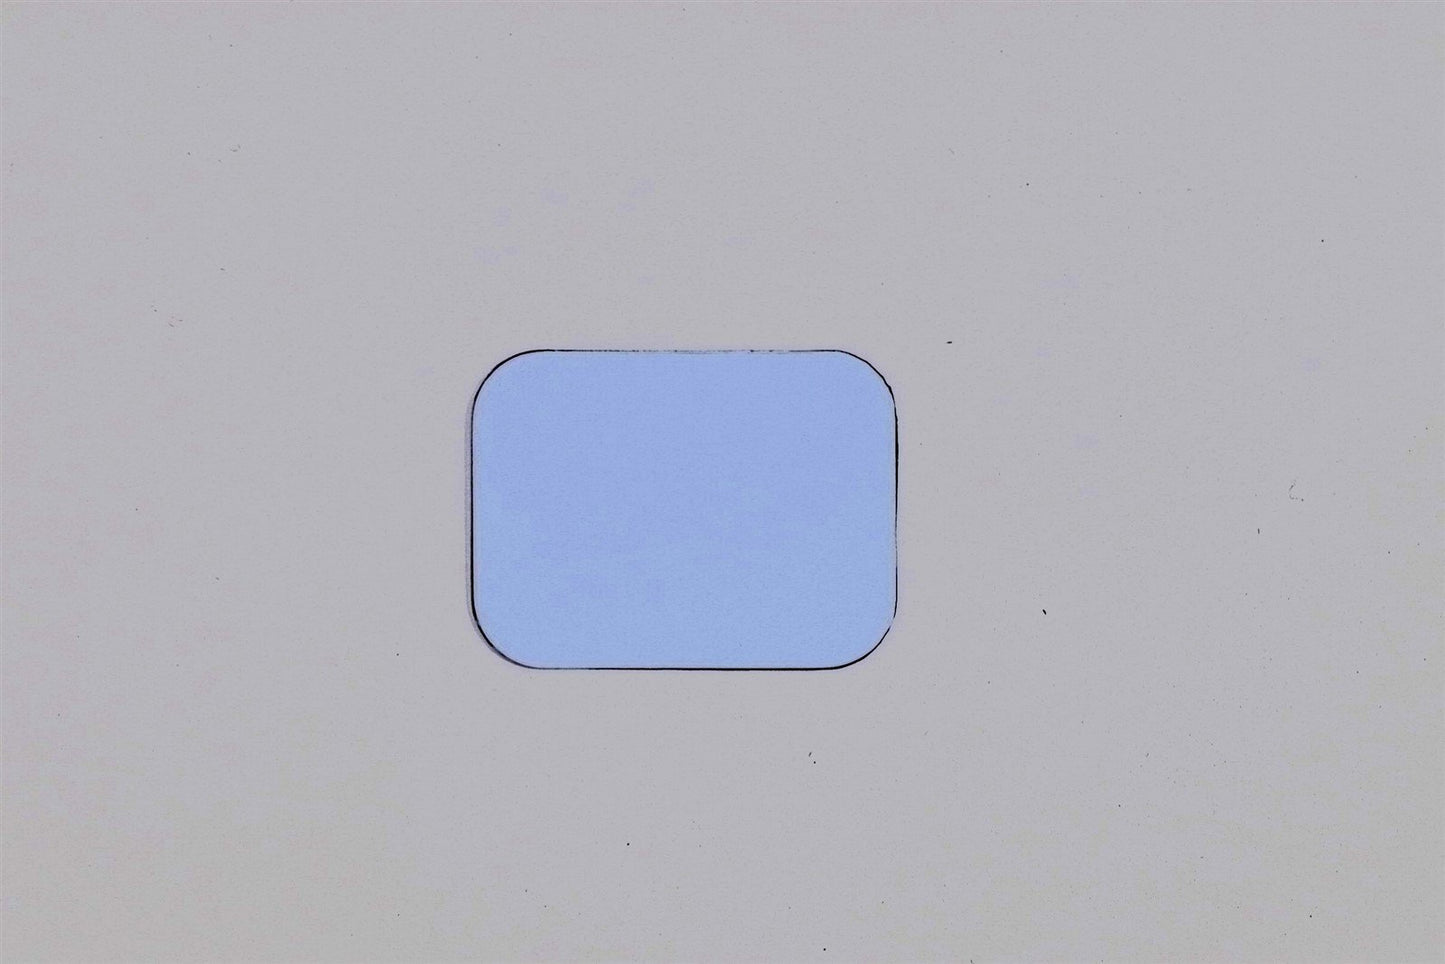 NEW Phosphor X-Ray Dental Plate Size 2 compatible for X-PSP machines